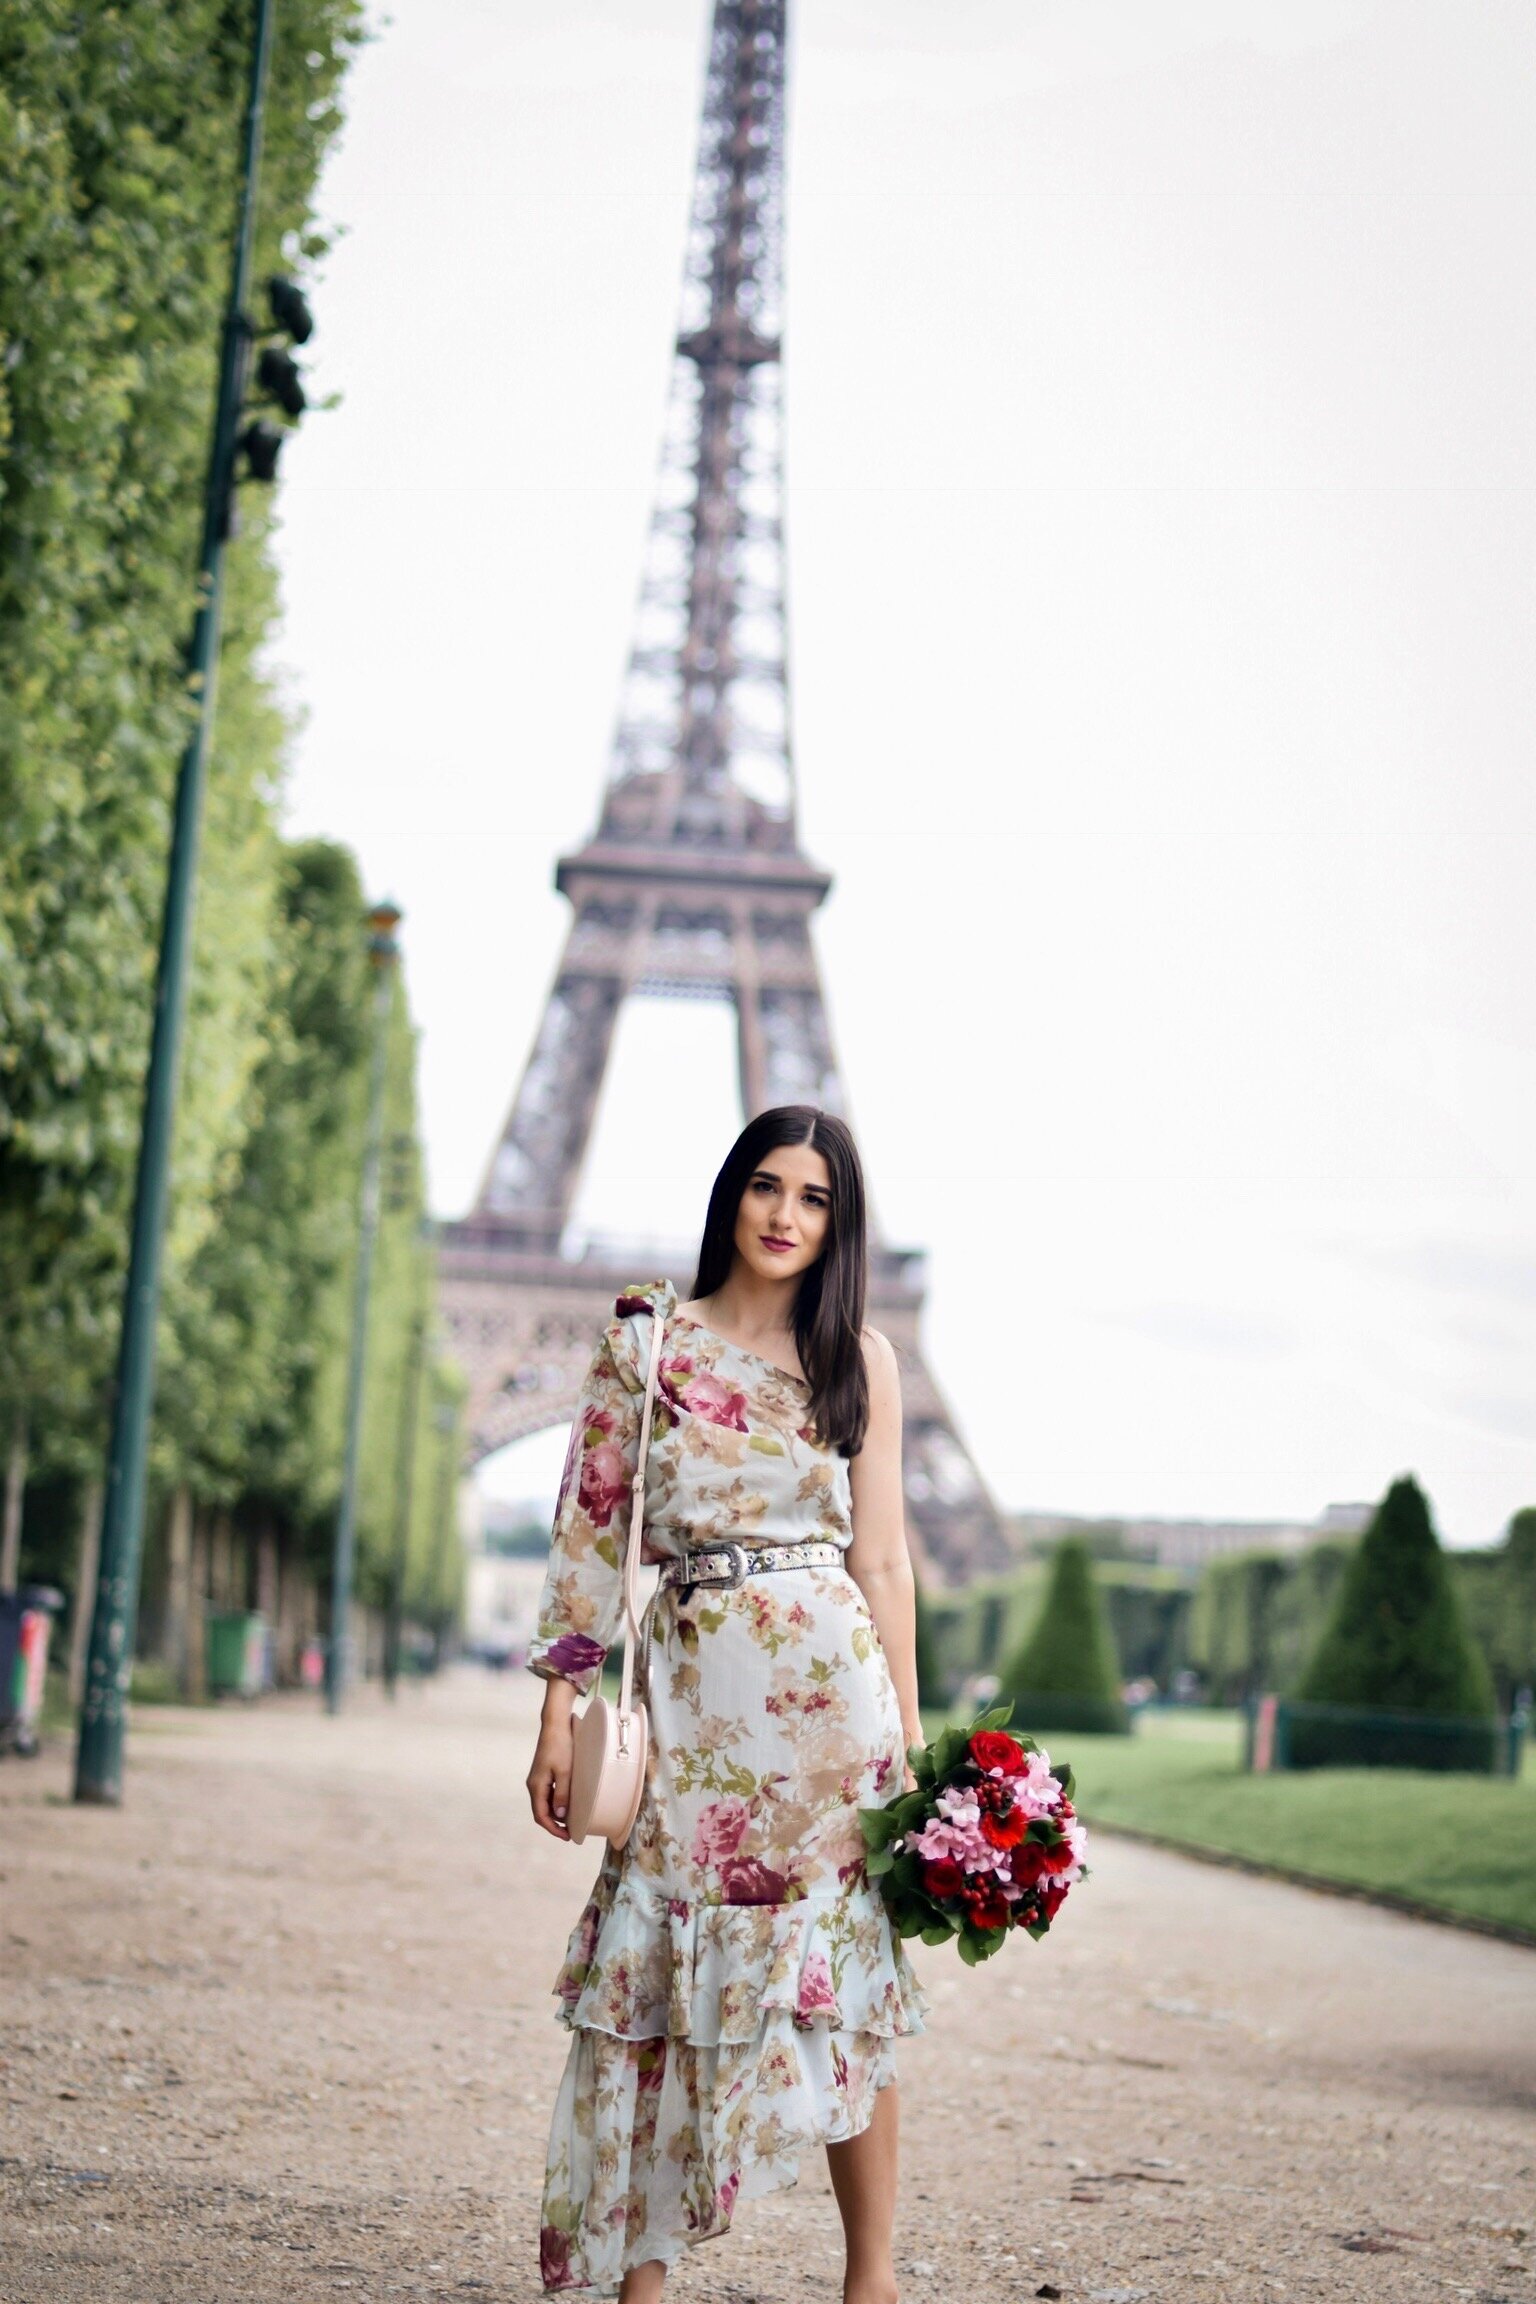 My Top 10 Favorite Spots In Paris Esther Santer NYC Street Style Blogger Travel Outfit What To Do Where To Go Tourist Attractions Saint Germain Moulin Rouge Black and White Pillars Eiffel Tower Versailles Laduree Saint Michel Bag Recommendation France.jpg